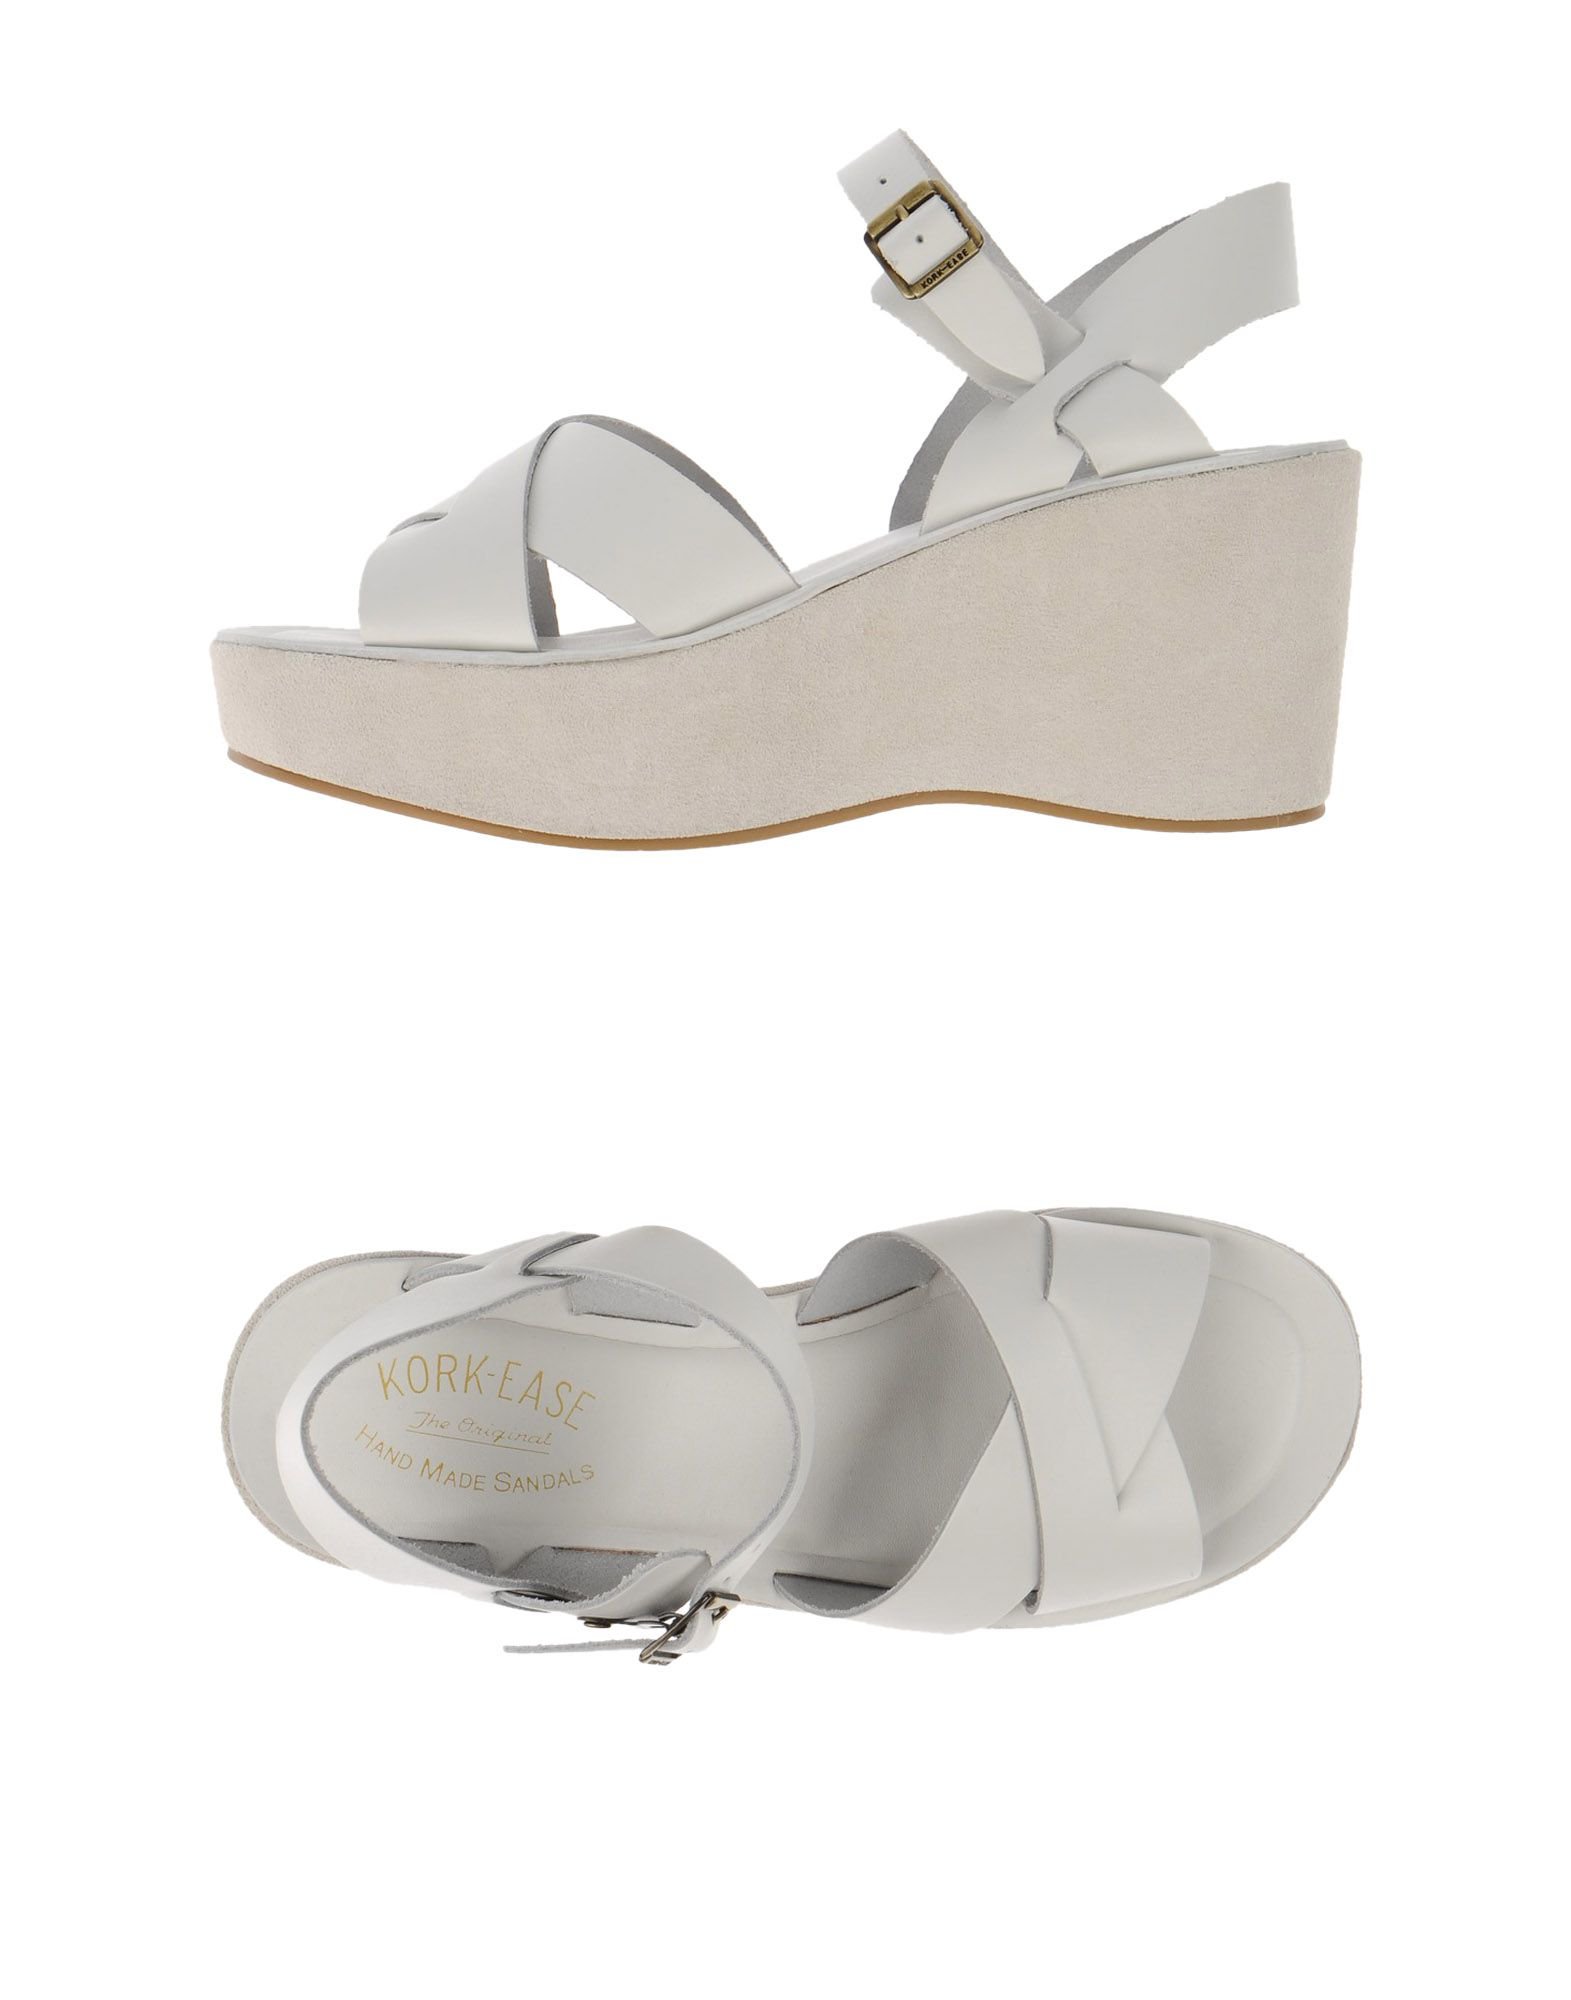 Kork-Ease Leather Sandals in White - Lyst